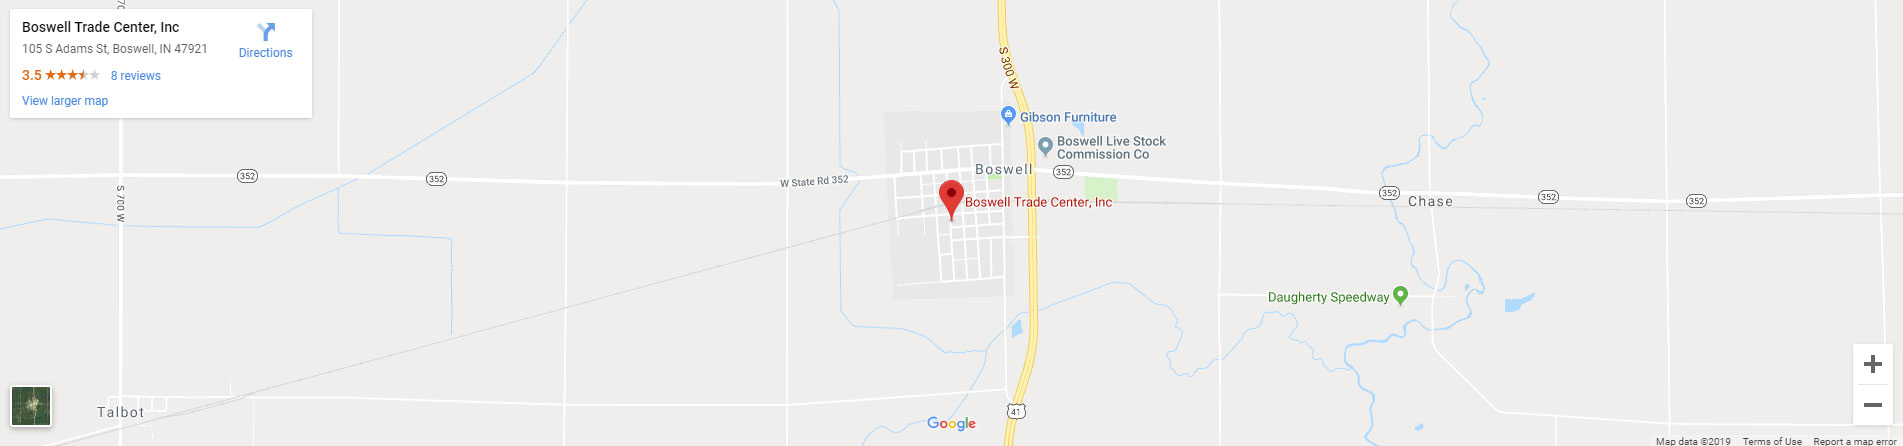 boswell trade center map